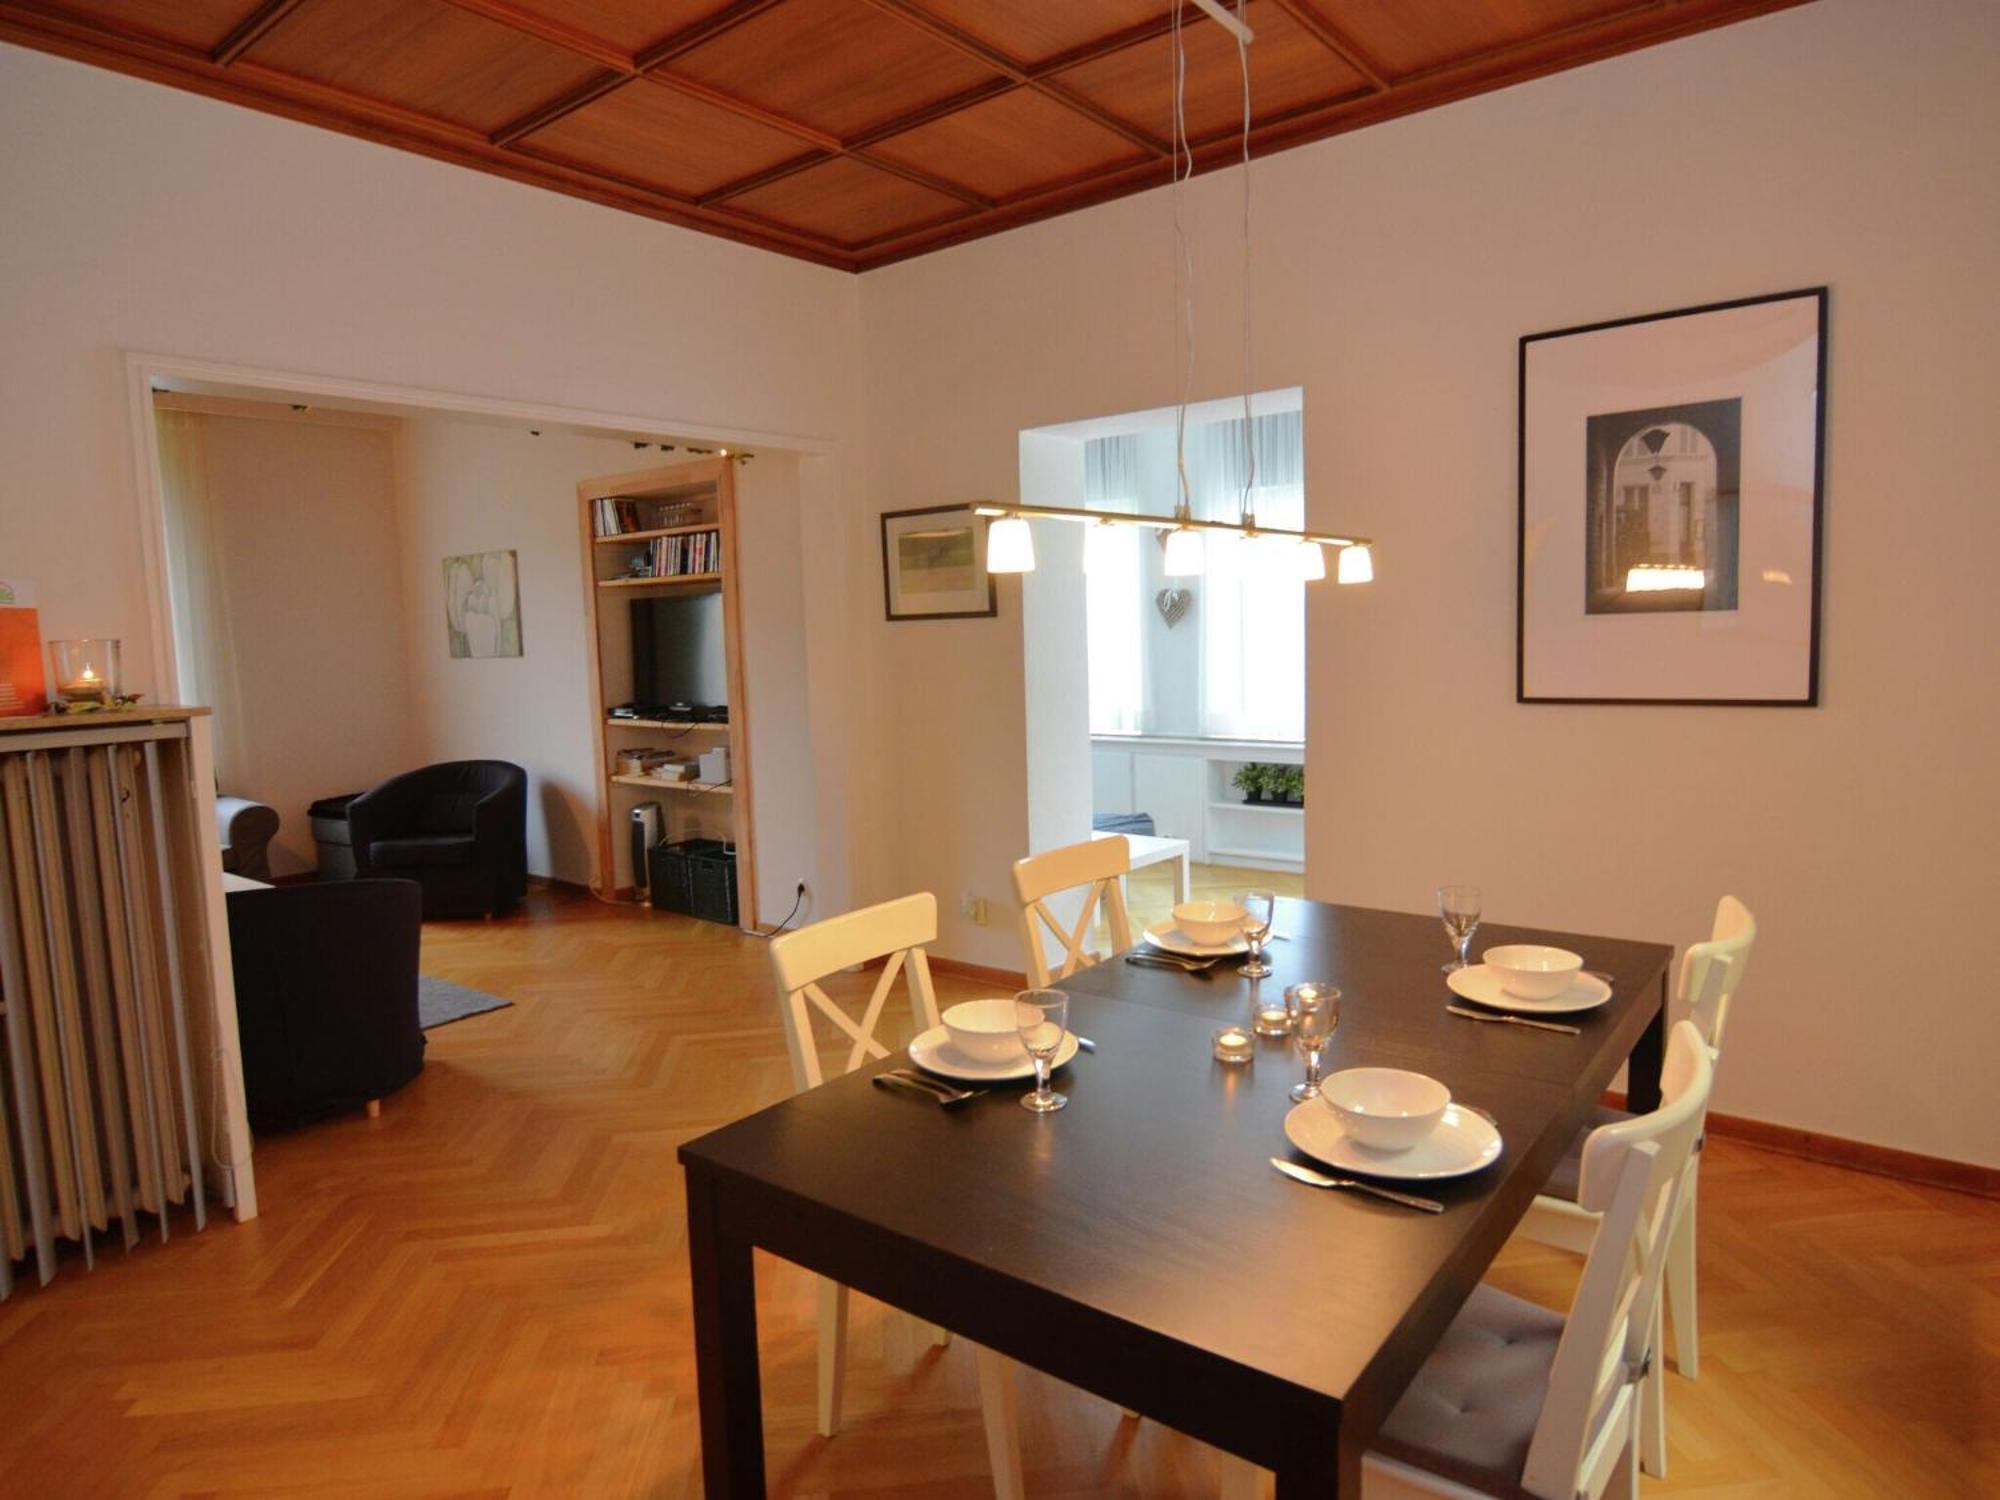 Spacious Apartment In Weser Uplands With Garden 巴特皮尔蒙特 外观 照片